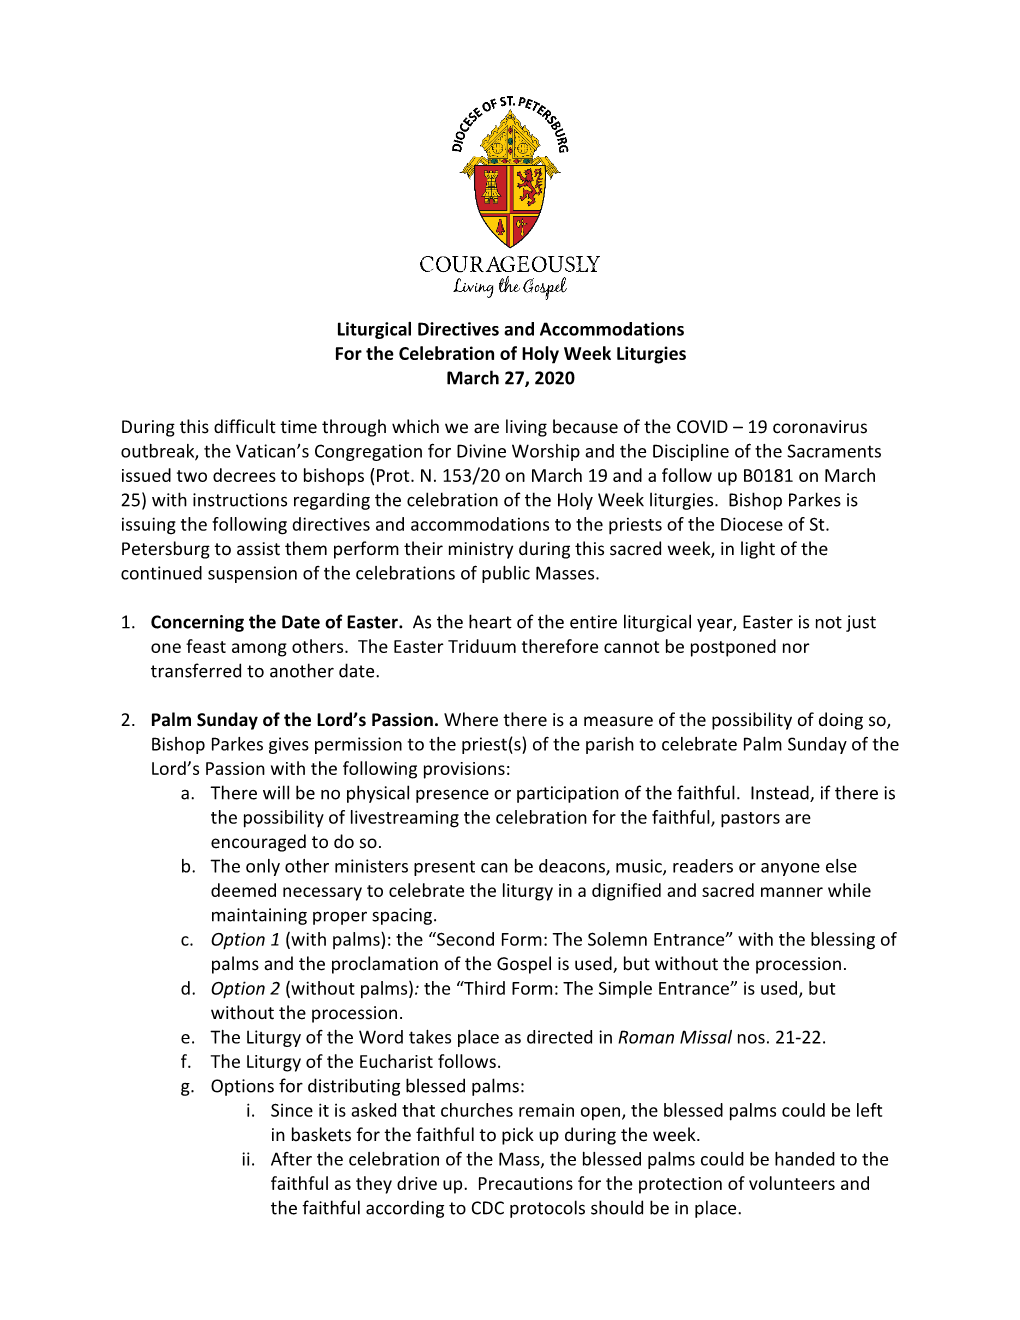 Liturgical Directives and Accommodations for the Celebration of Holy Week Liturgies March 27, 2020